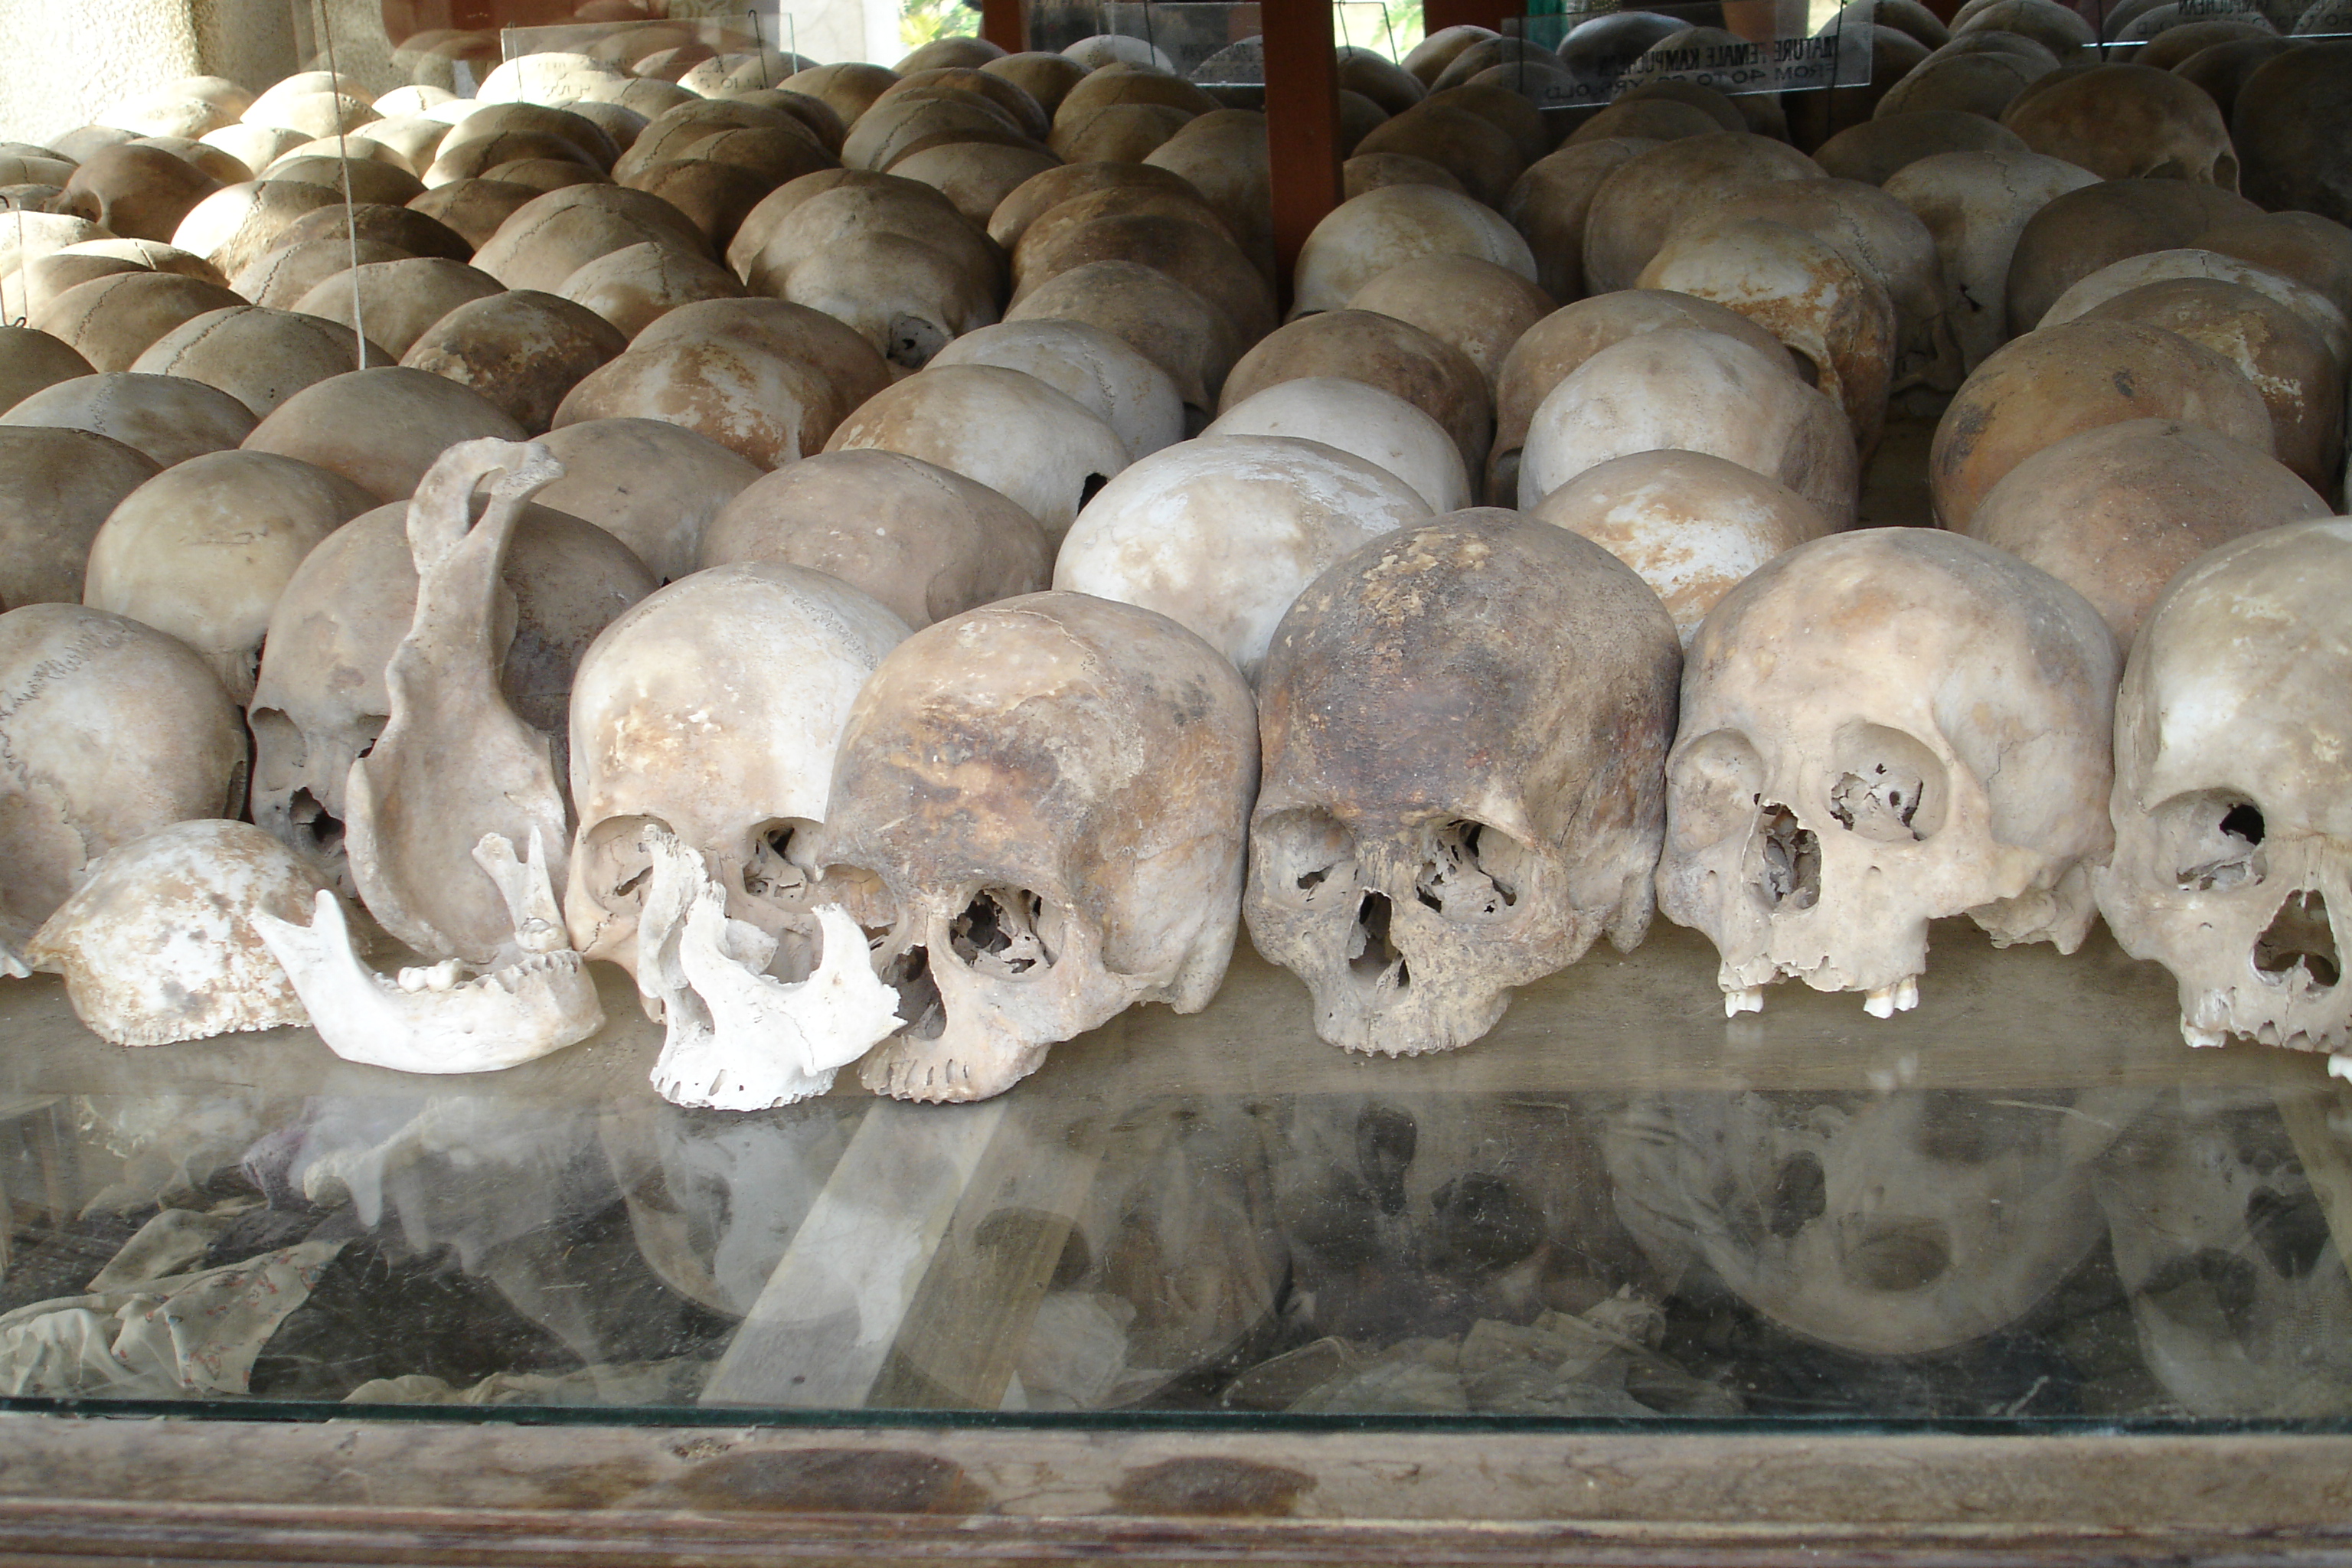 Killing Fields of Phnom Pehn filled with Mass Graves